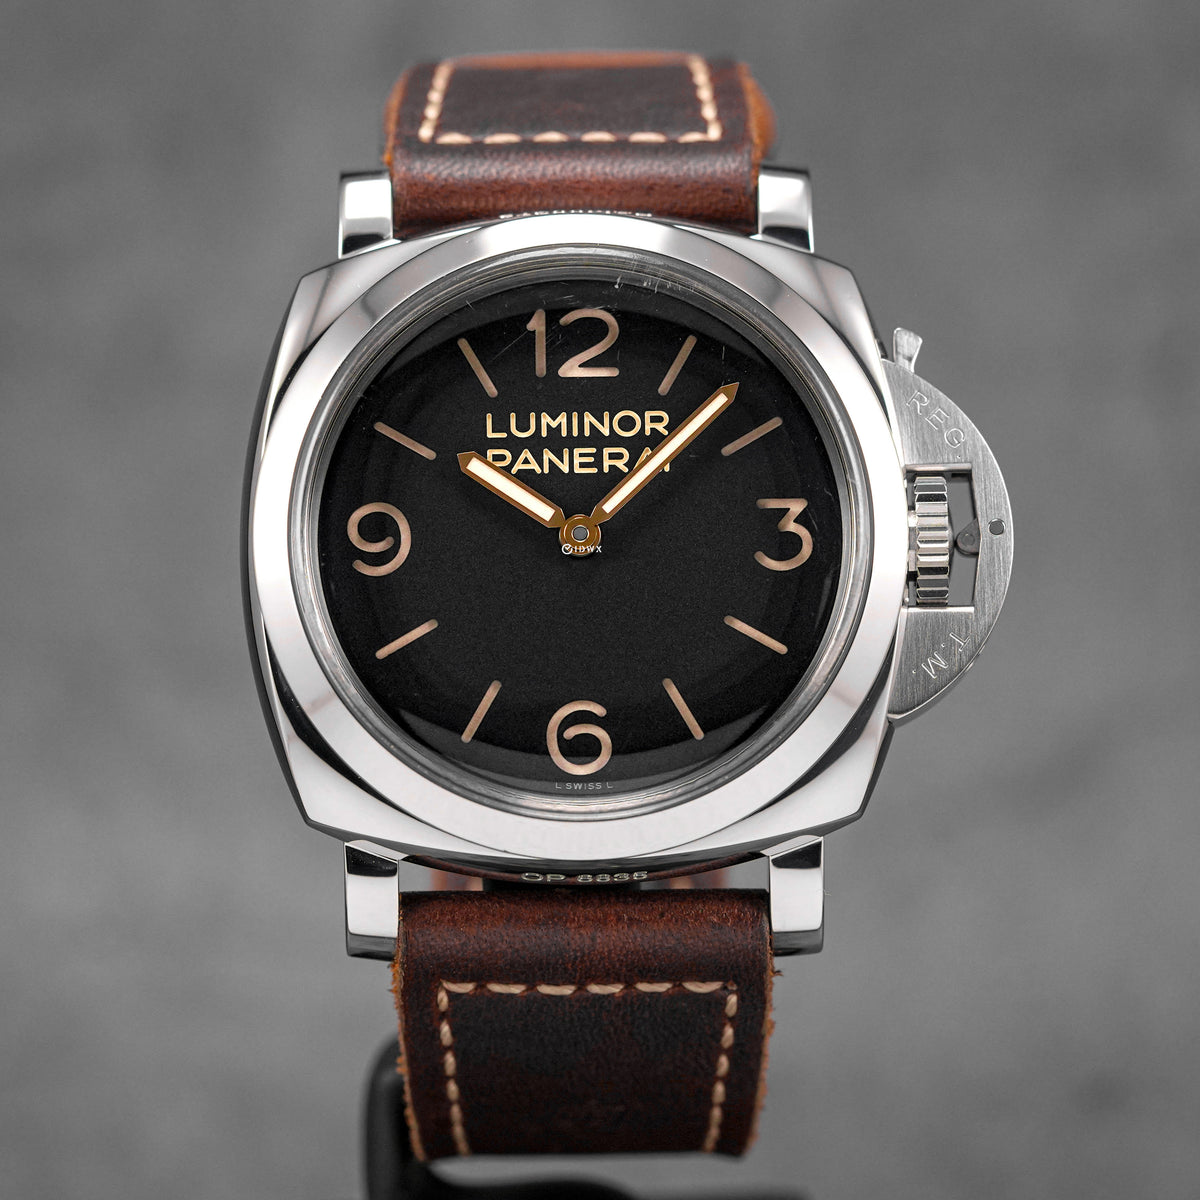 LUMINOR 1950 3 DAYS 47MM BLACK DIAL BROWN LEATHER STRAP PAM 372 (2014)